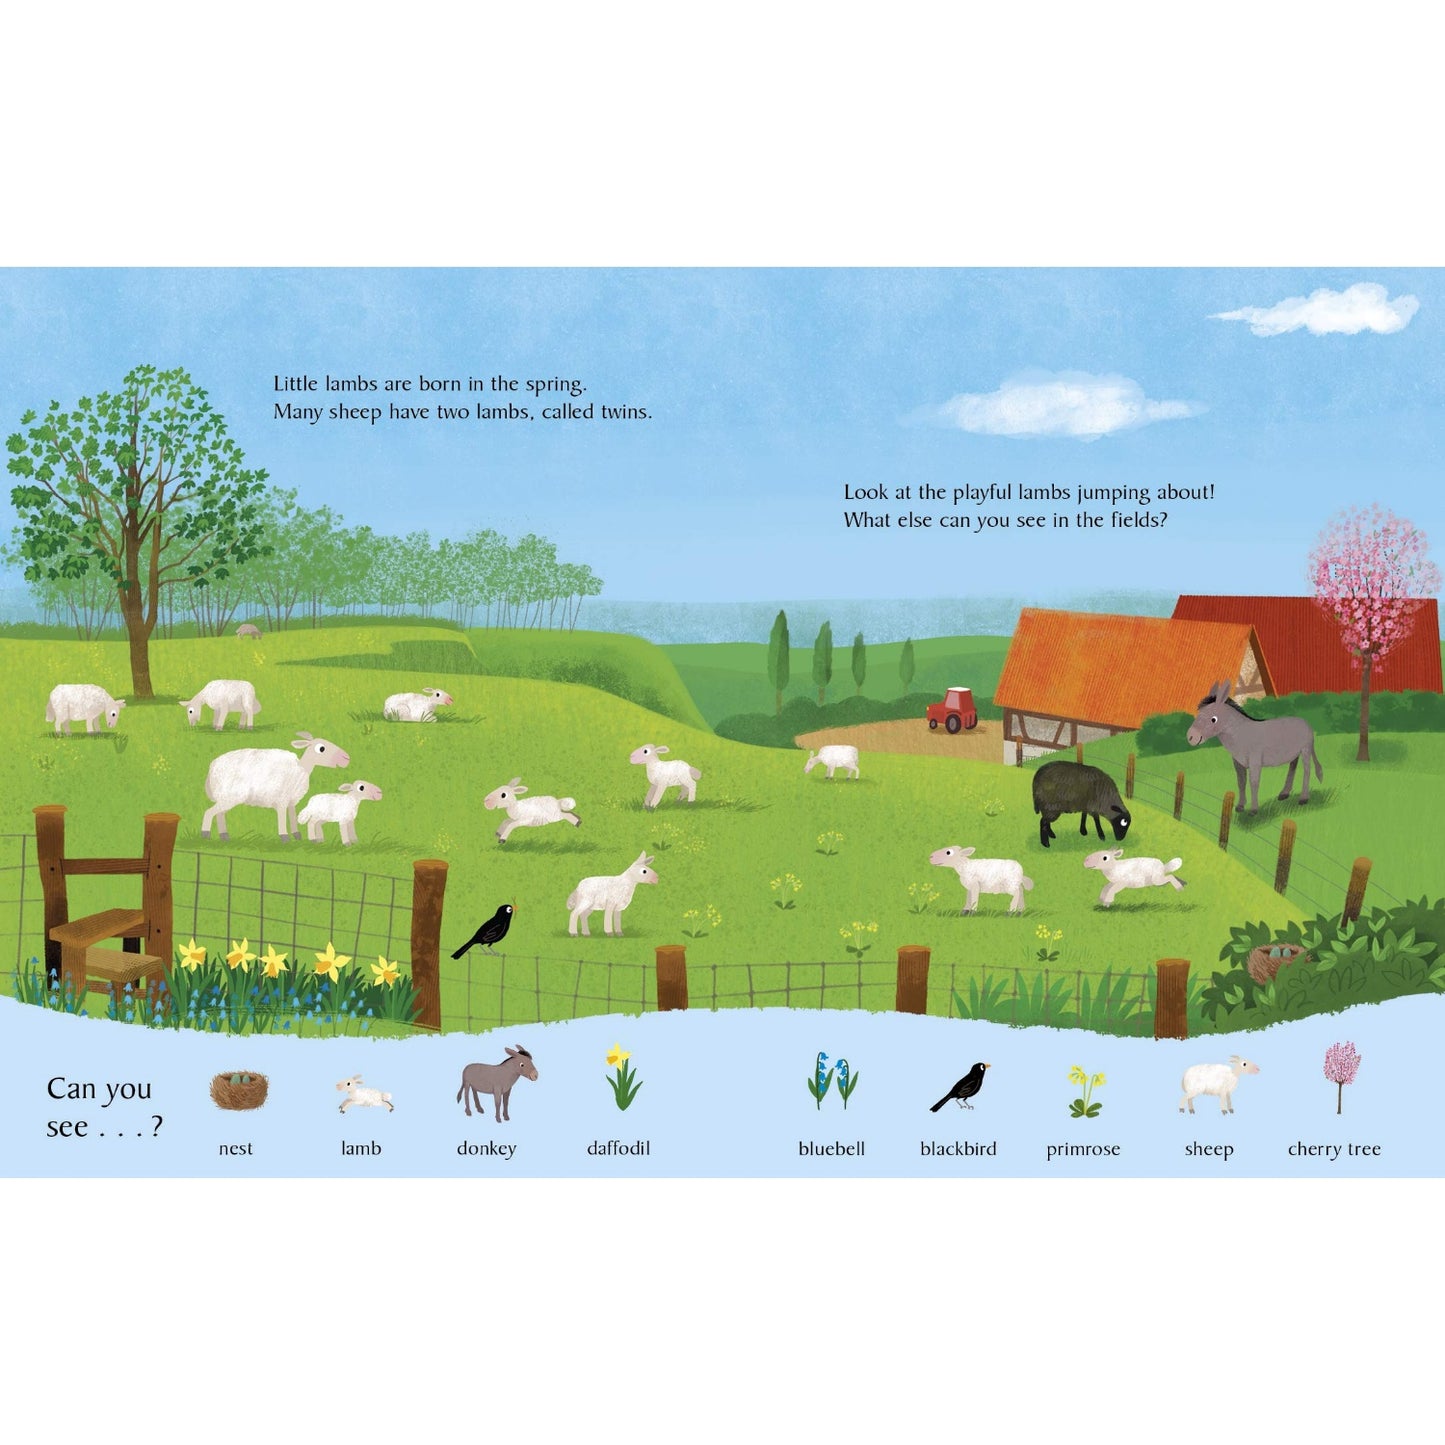 Look and Say What You See on the Farm | Children’s Book on Farm Life